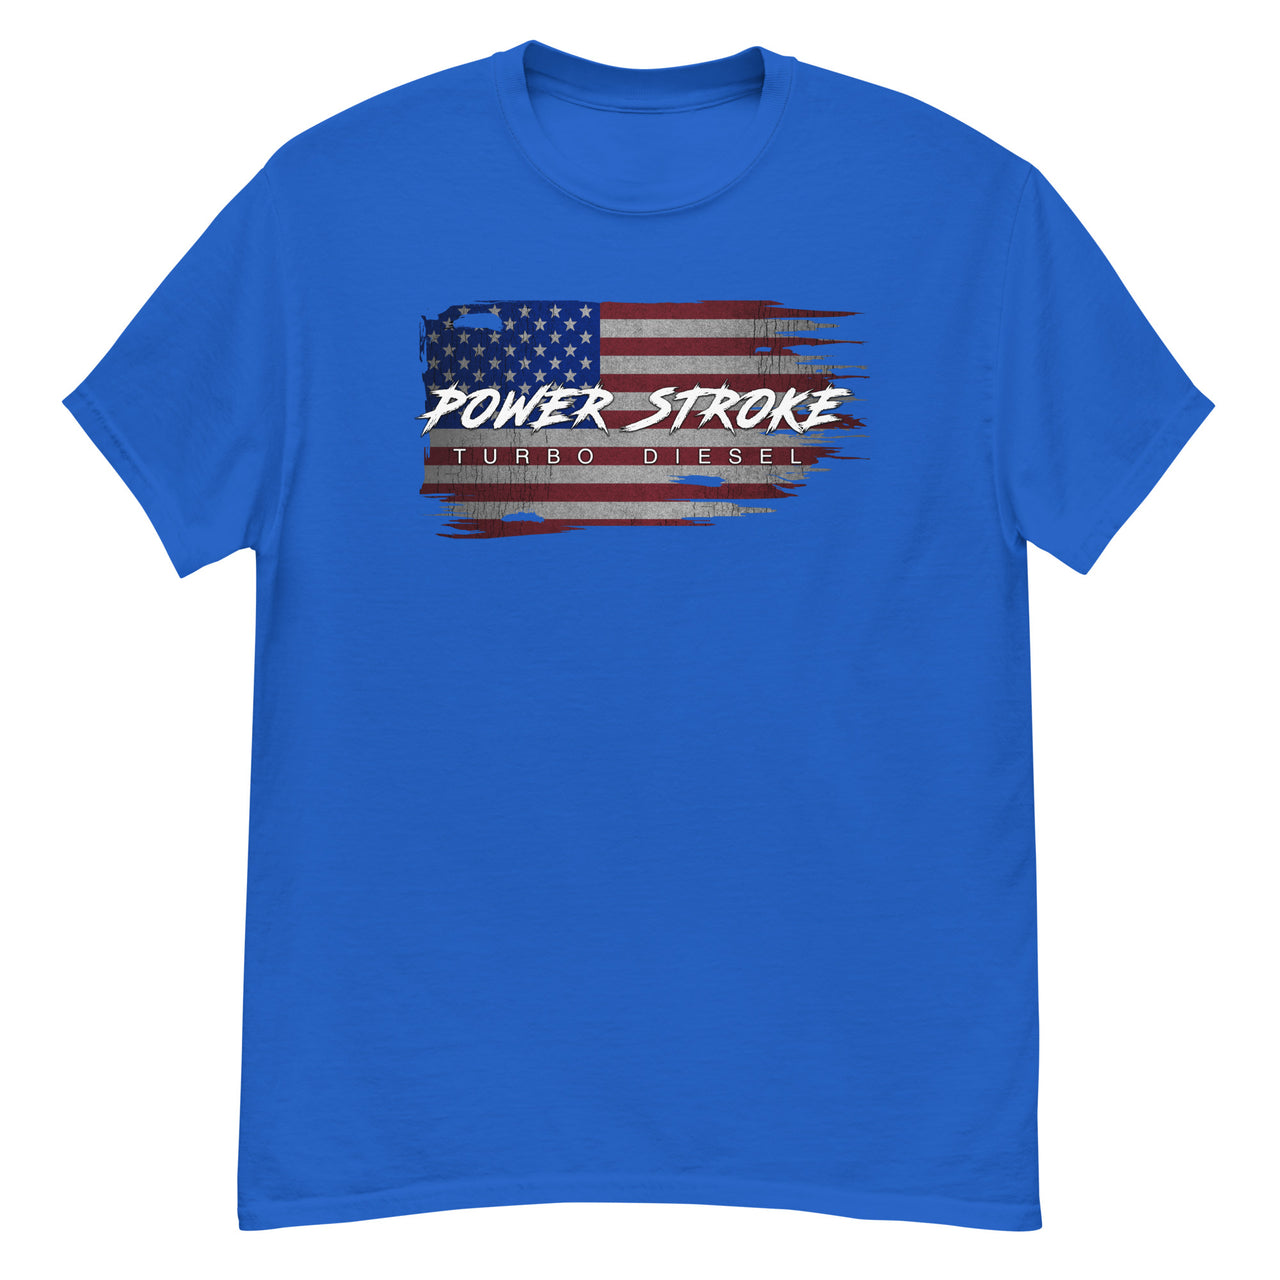 Power Stroke Diesel American Flag T-Shirt in blue from Aggressive Thread